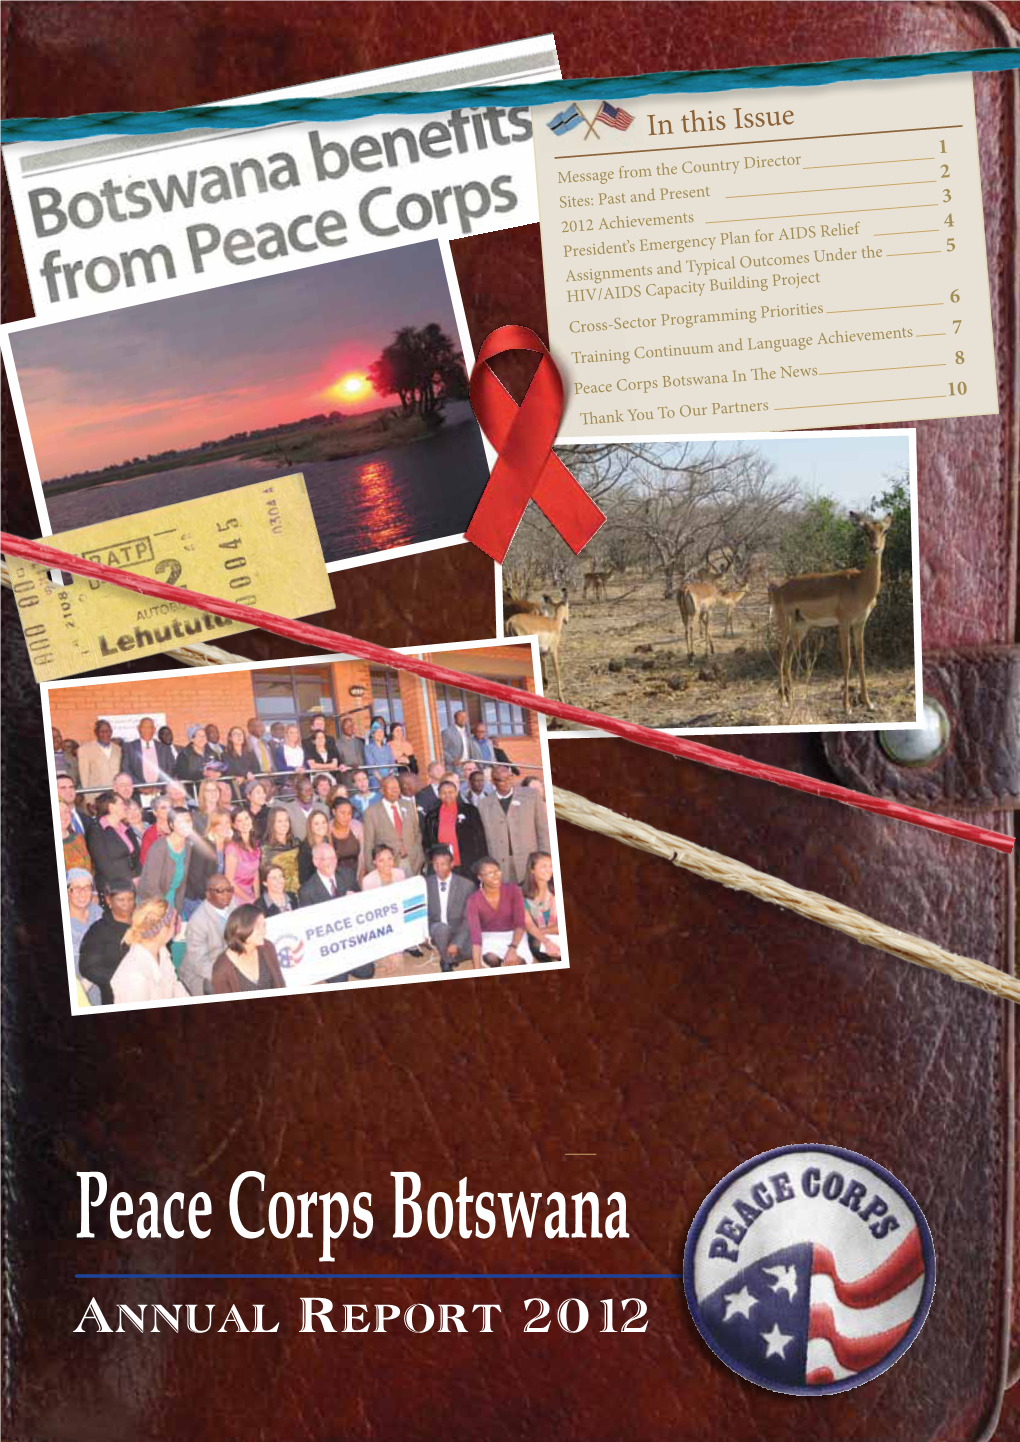 Peace Corps Botswana in the News 10 Thank You to Our Partners